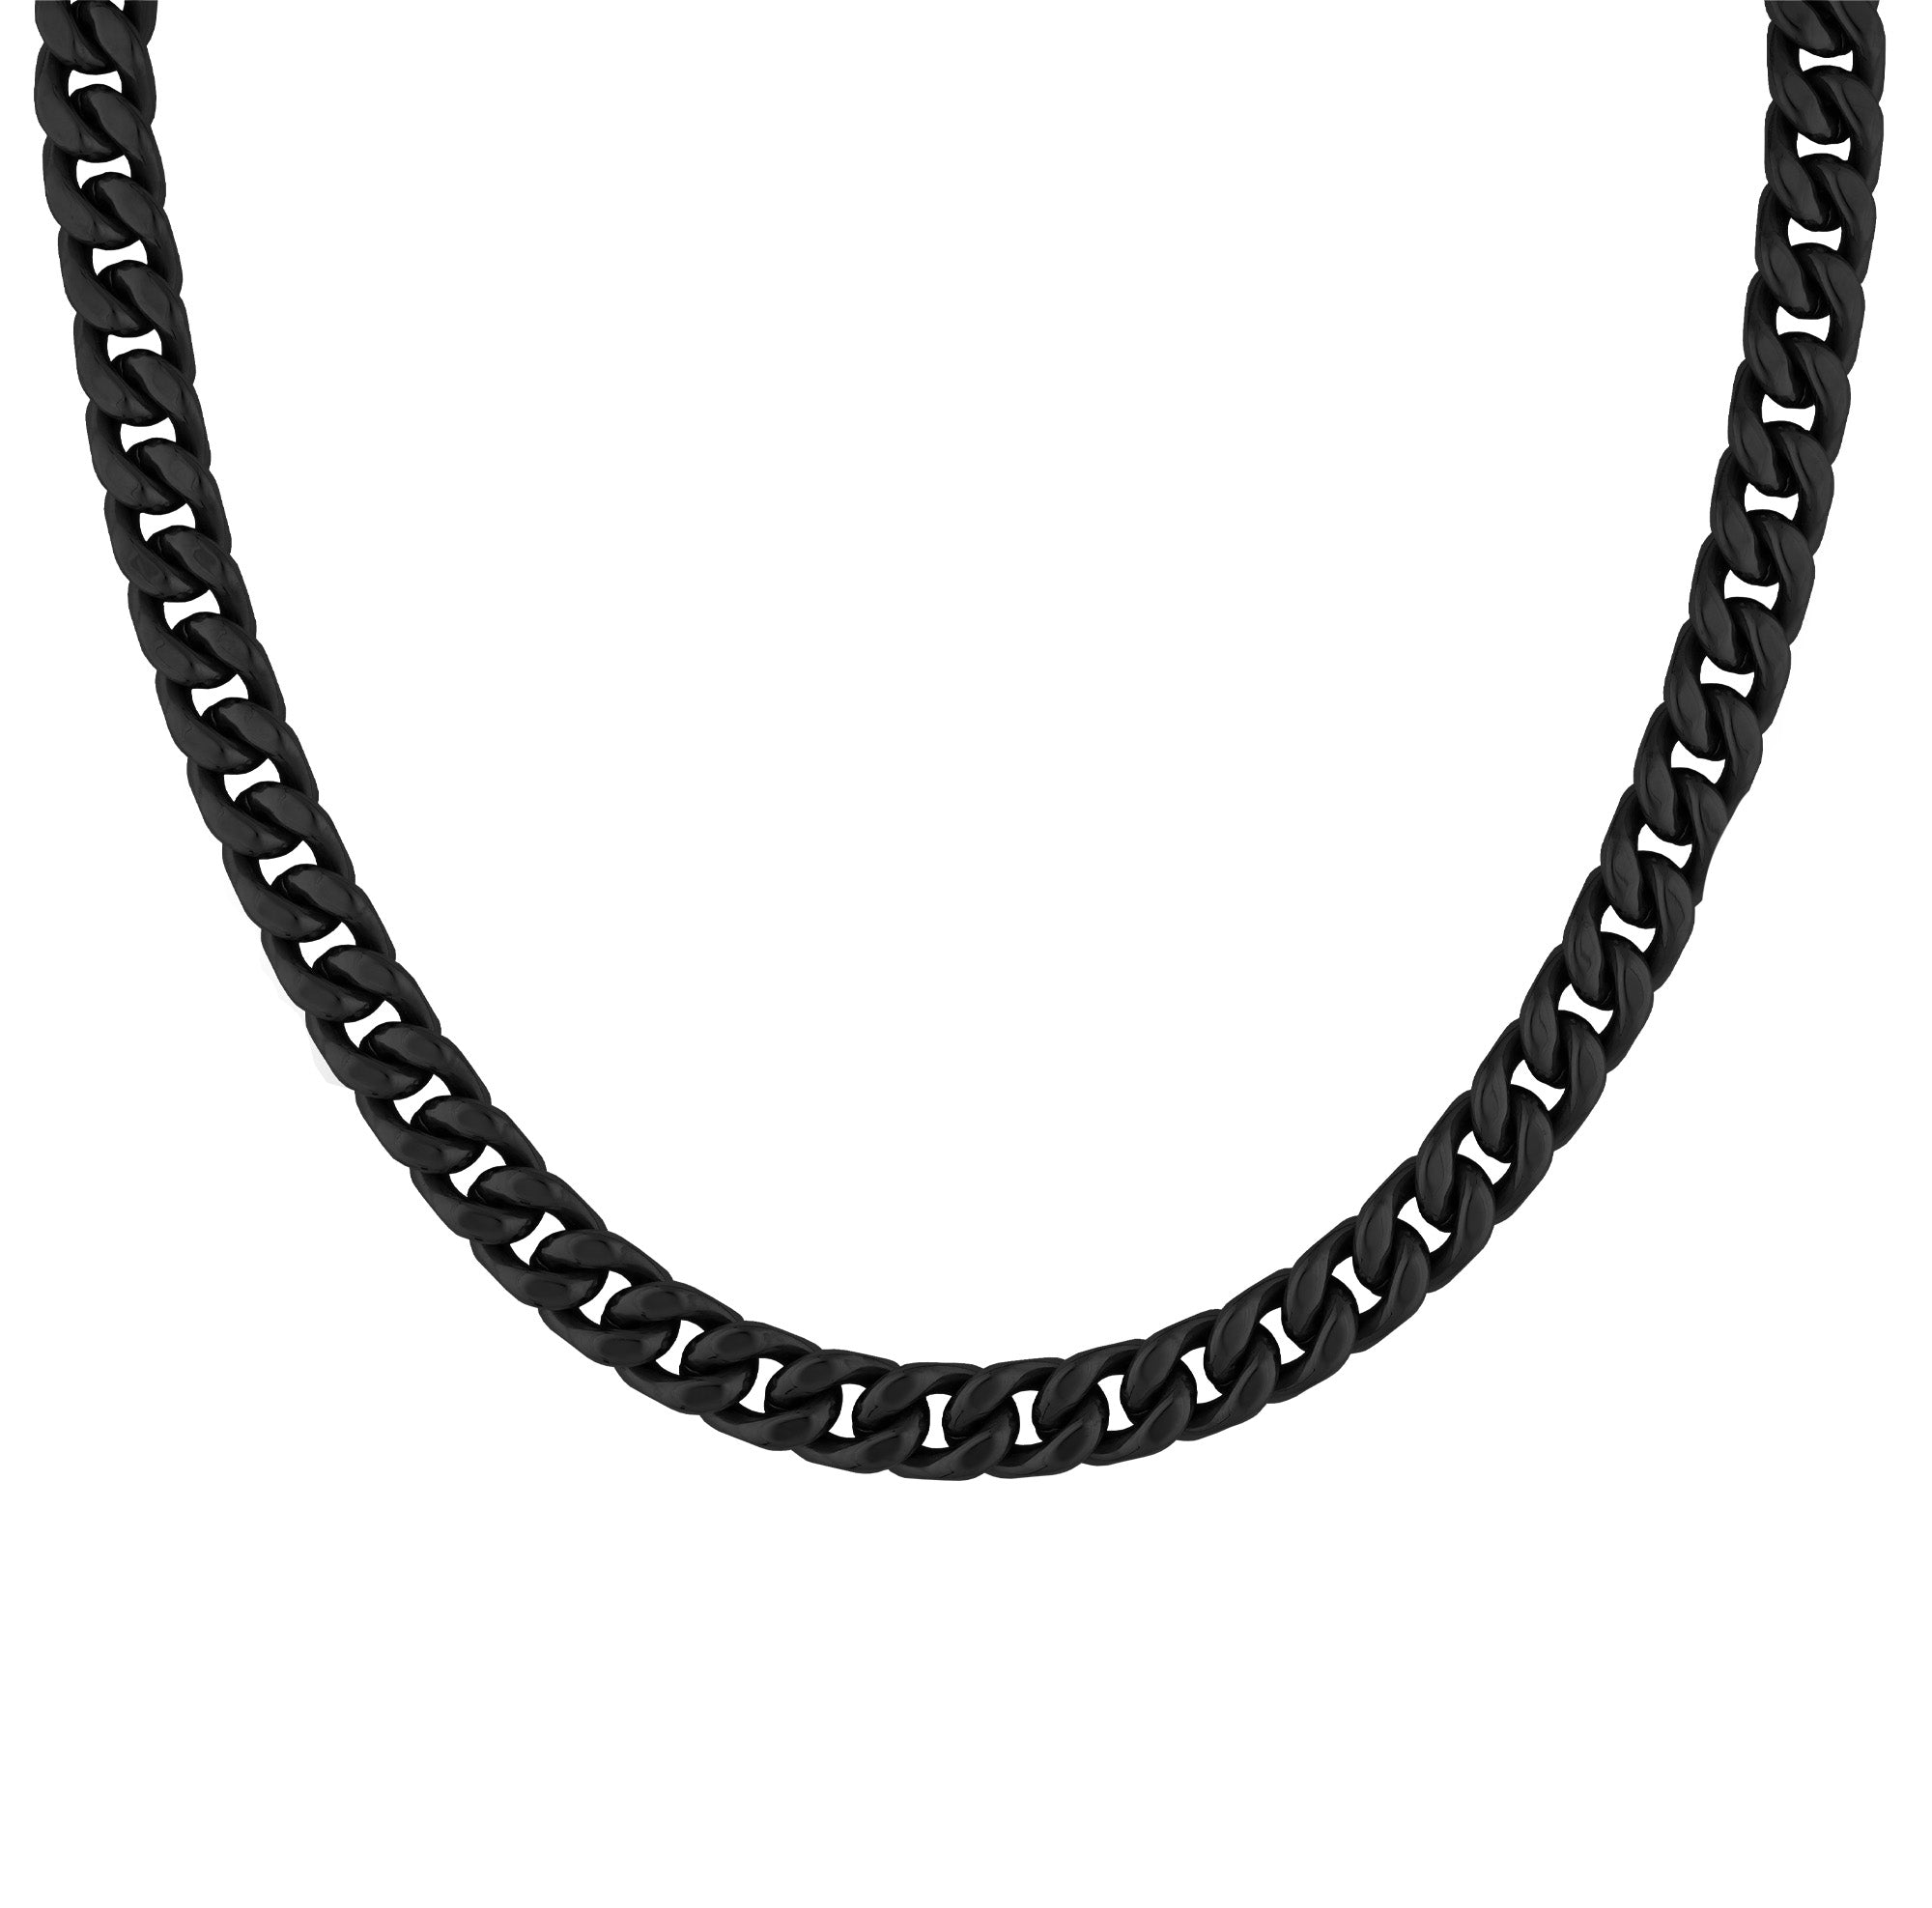 Cass men's necklace by Five Jwlry, designed with a 10mm tightly woven Cuban link chain in a black hue, crafted from water-resistant 316L stainless steel. Available in sizes 40cm, 45cm, 50cm, 55cm and 60cm. Hypoallergenic and accompanied by a 2-year warranty.